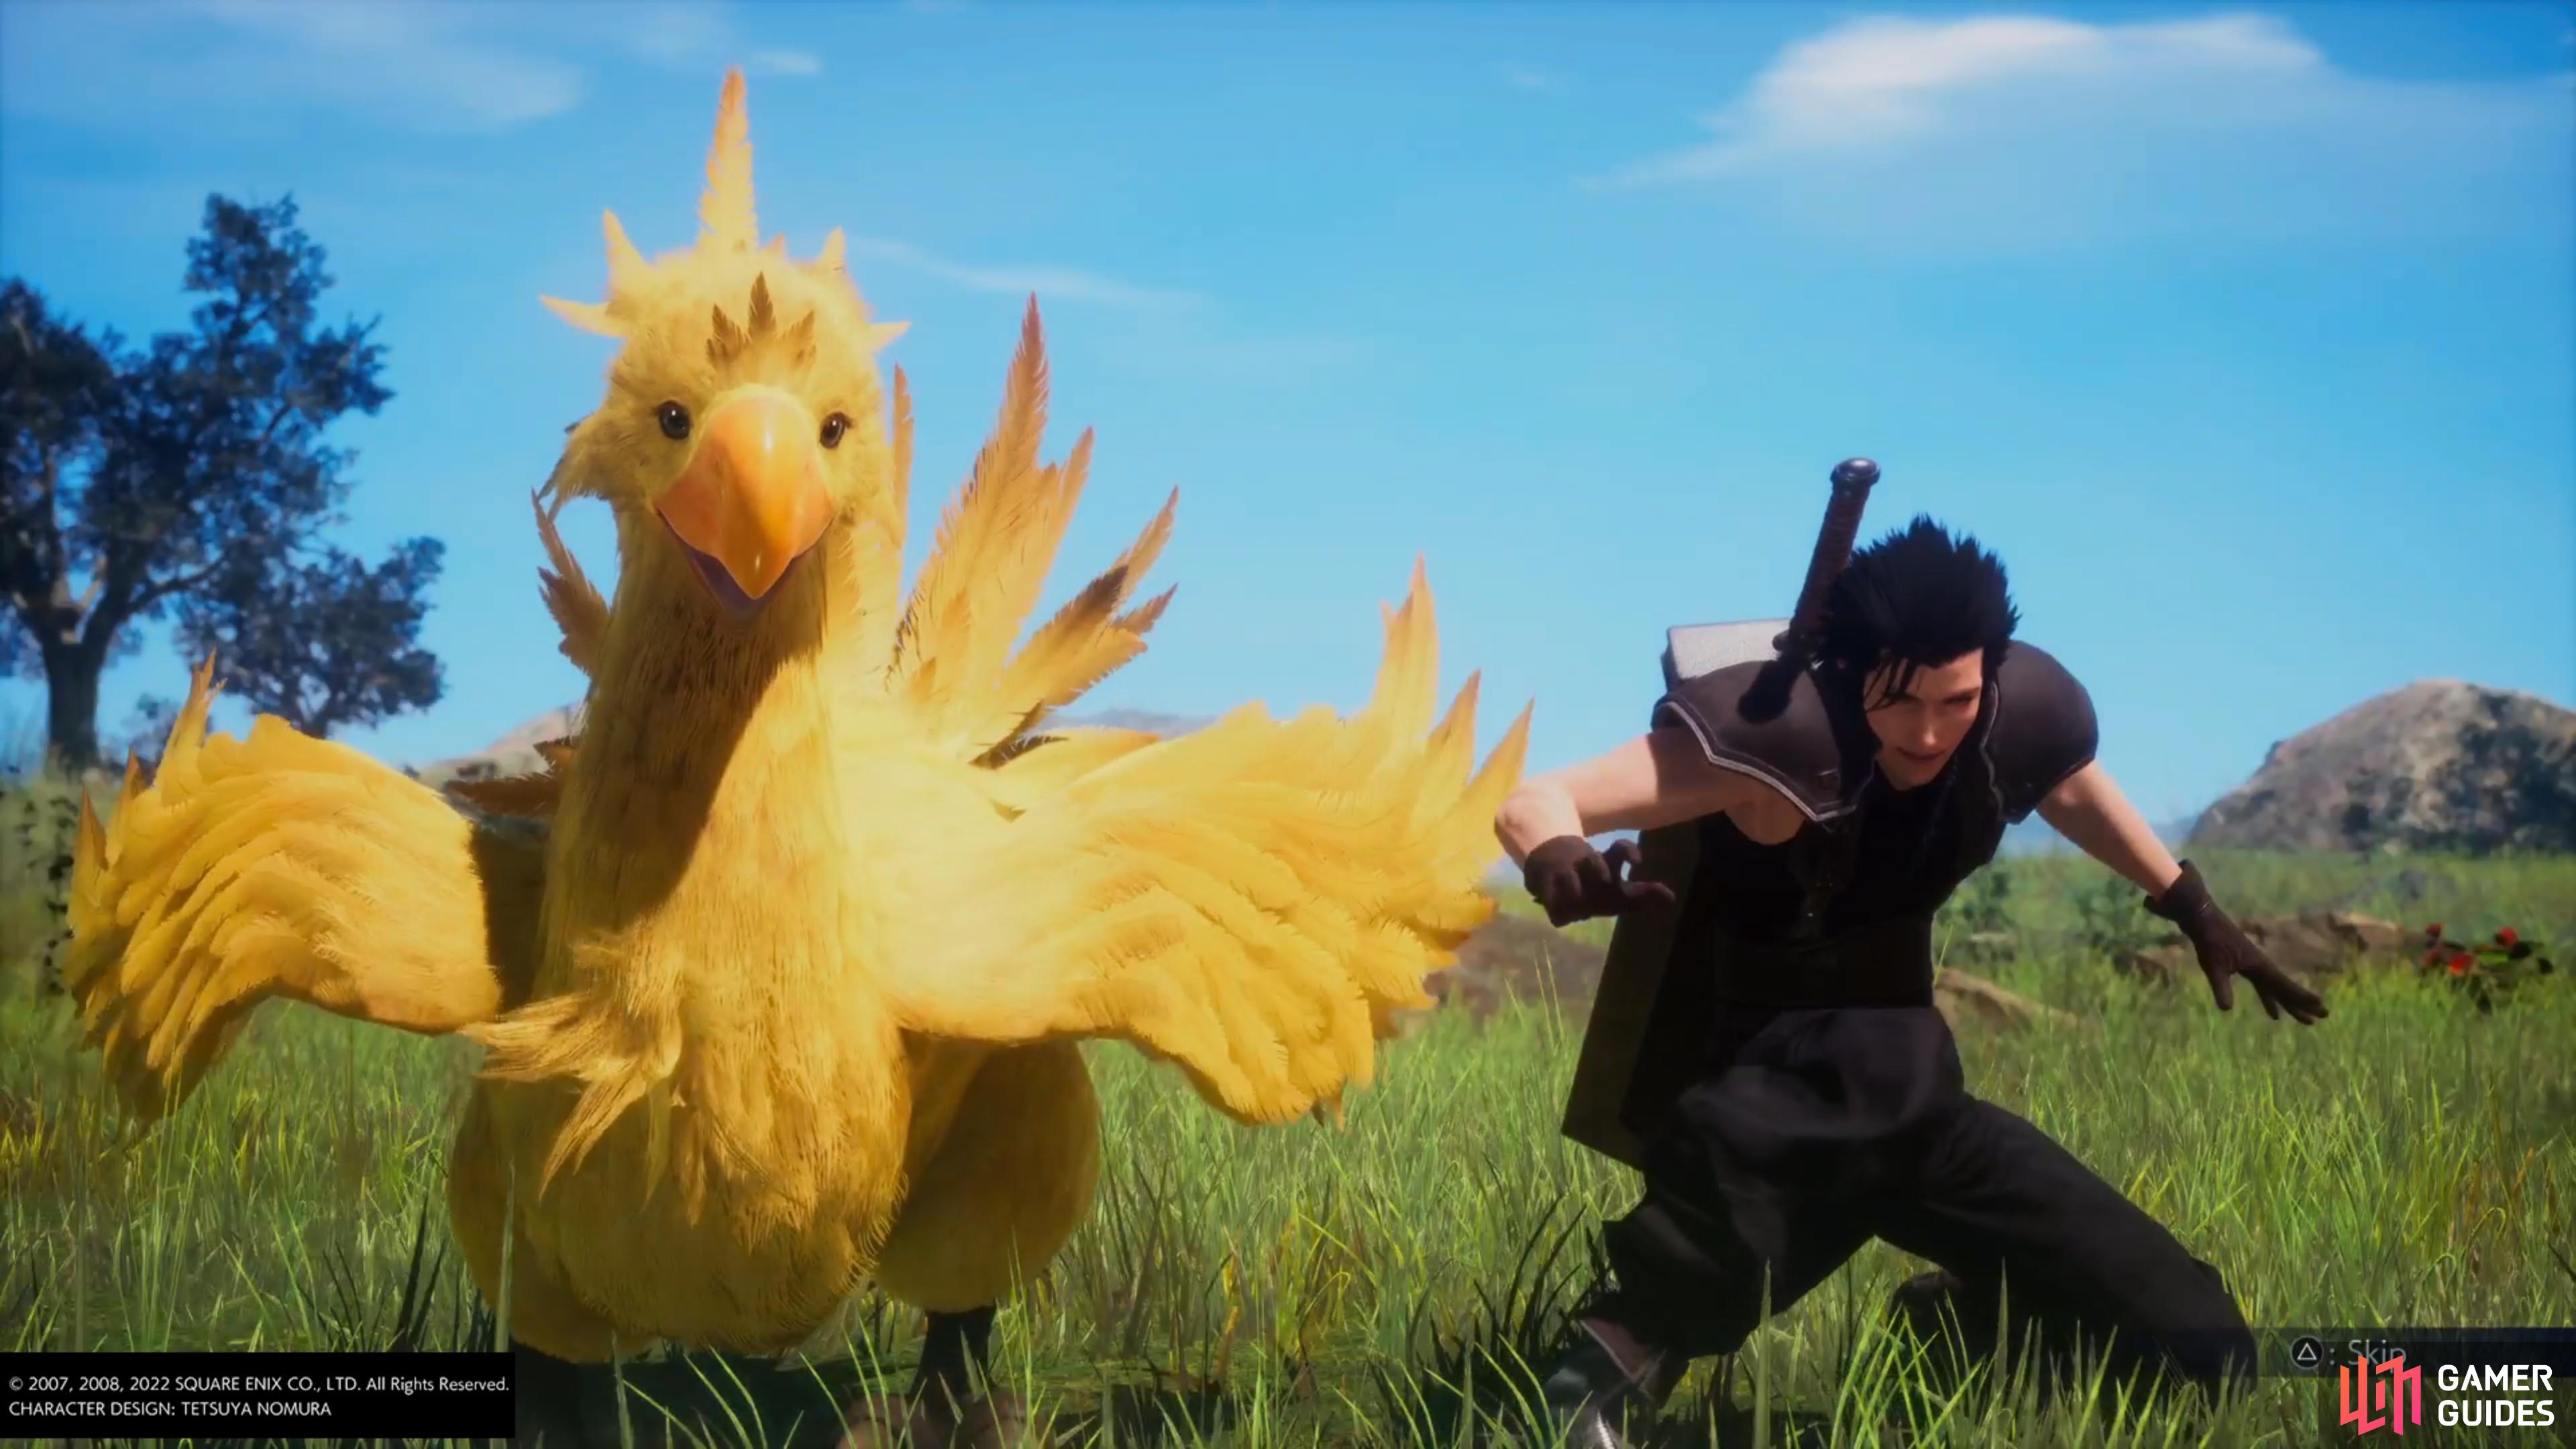 Zack and the Chocobo combine for a powerful Limit Break!